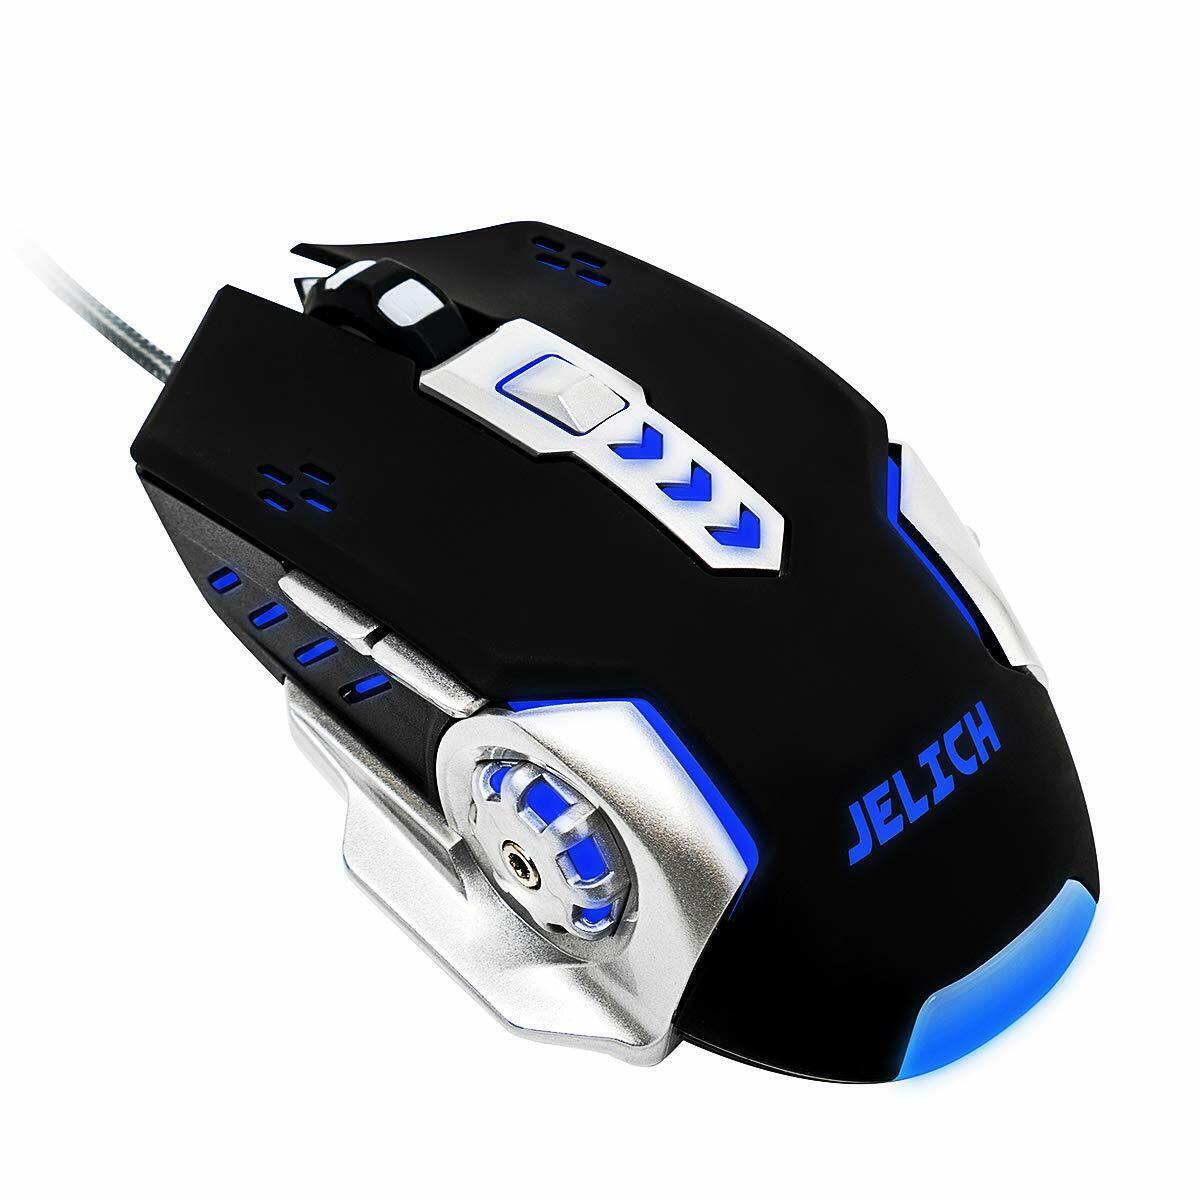 Gaming Mouse Ergonomic Mice – 3200 DPI 6 Buttons RGB Colorful Breathing LED